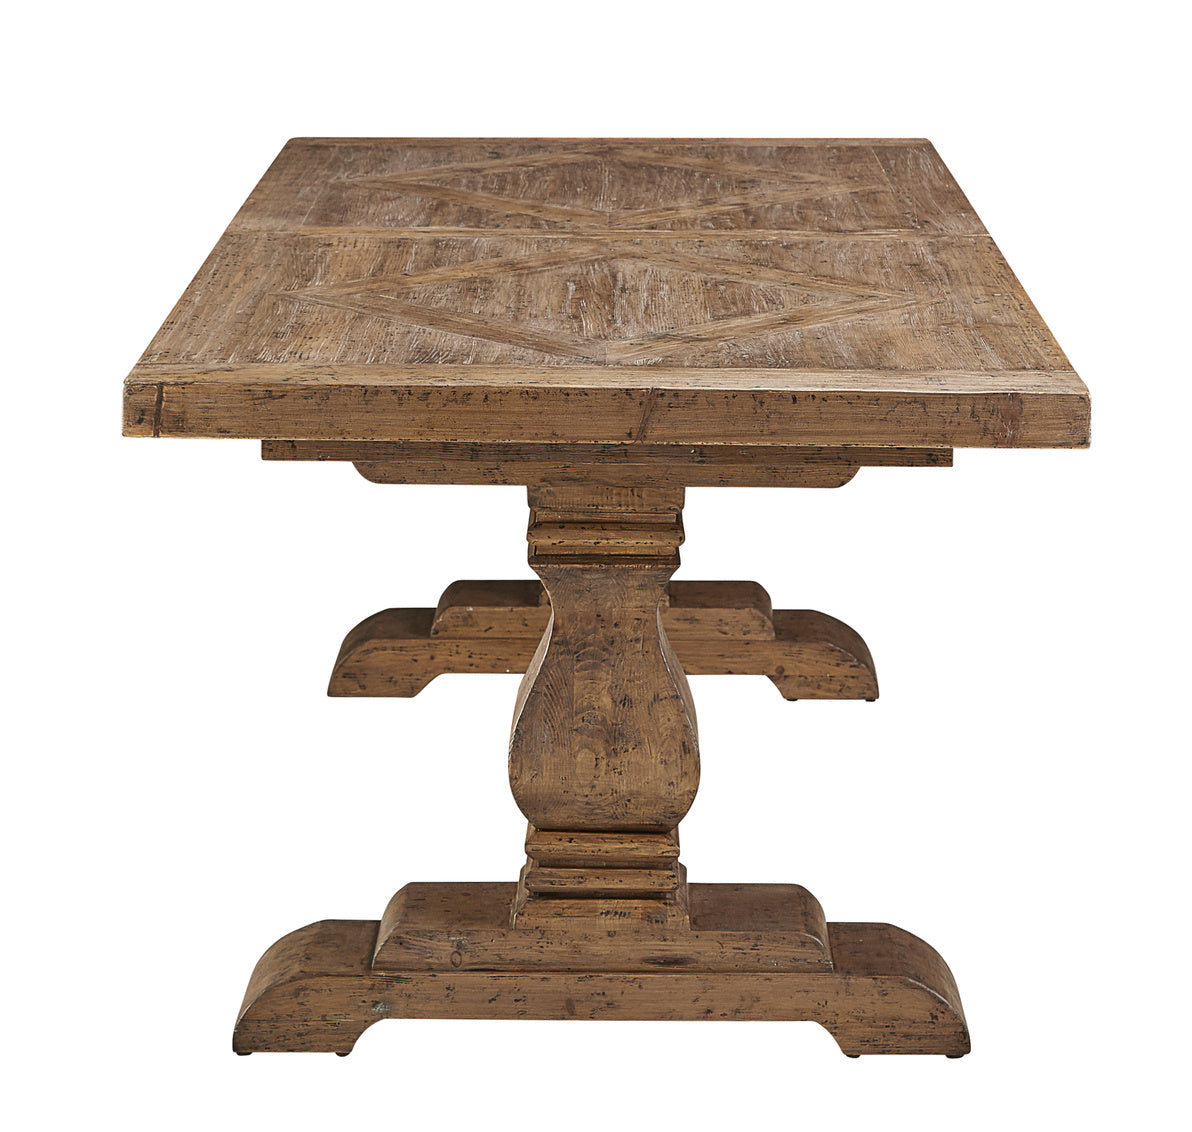 Manor House Extension Dining Table 87" - 107.5"